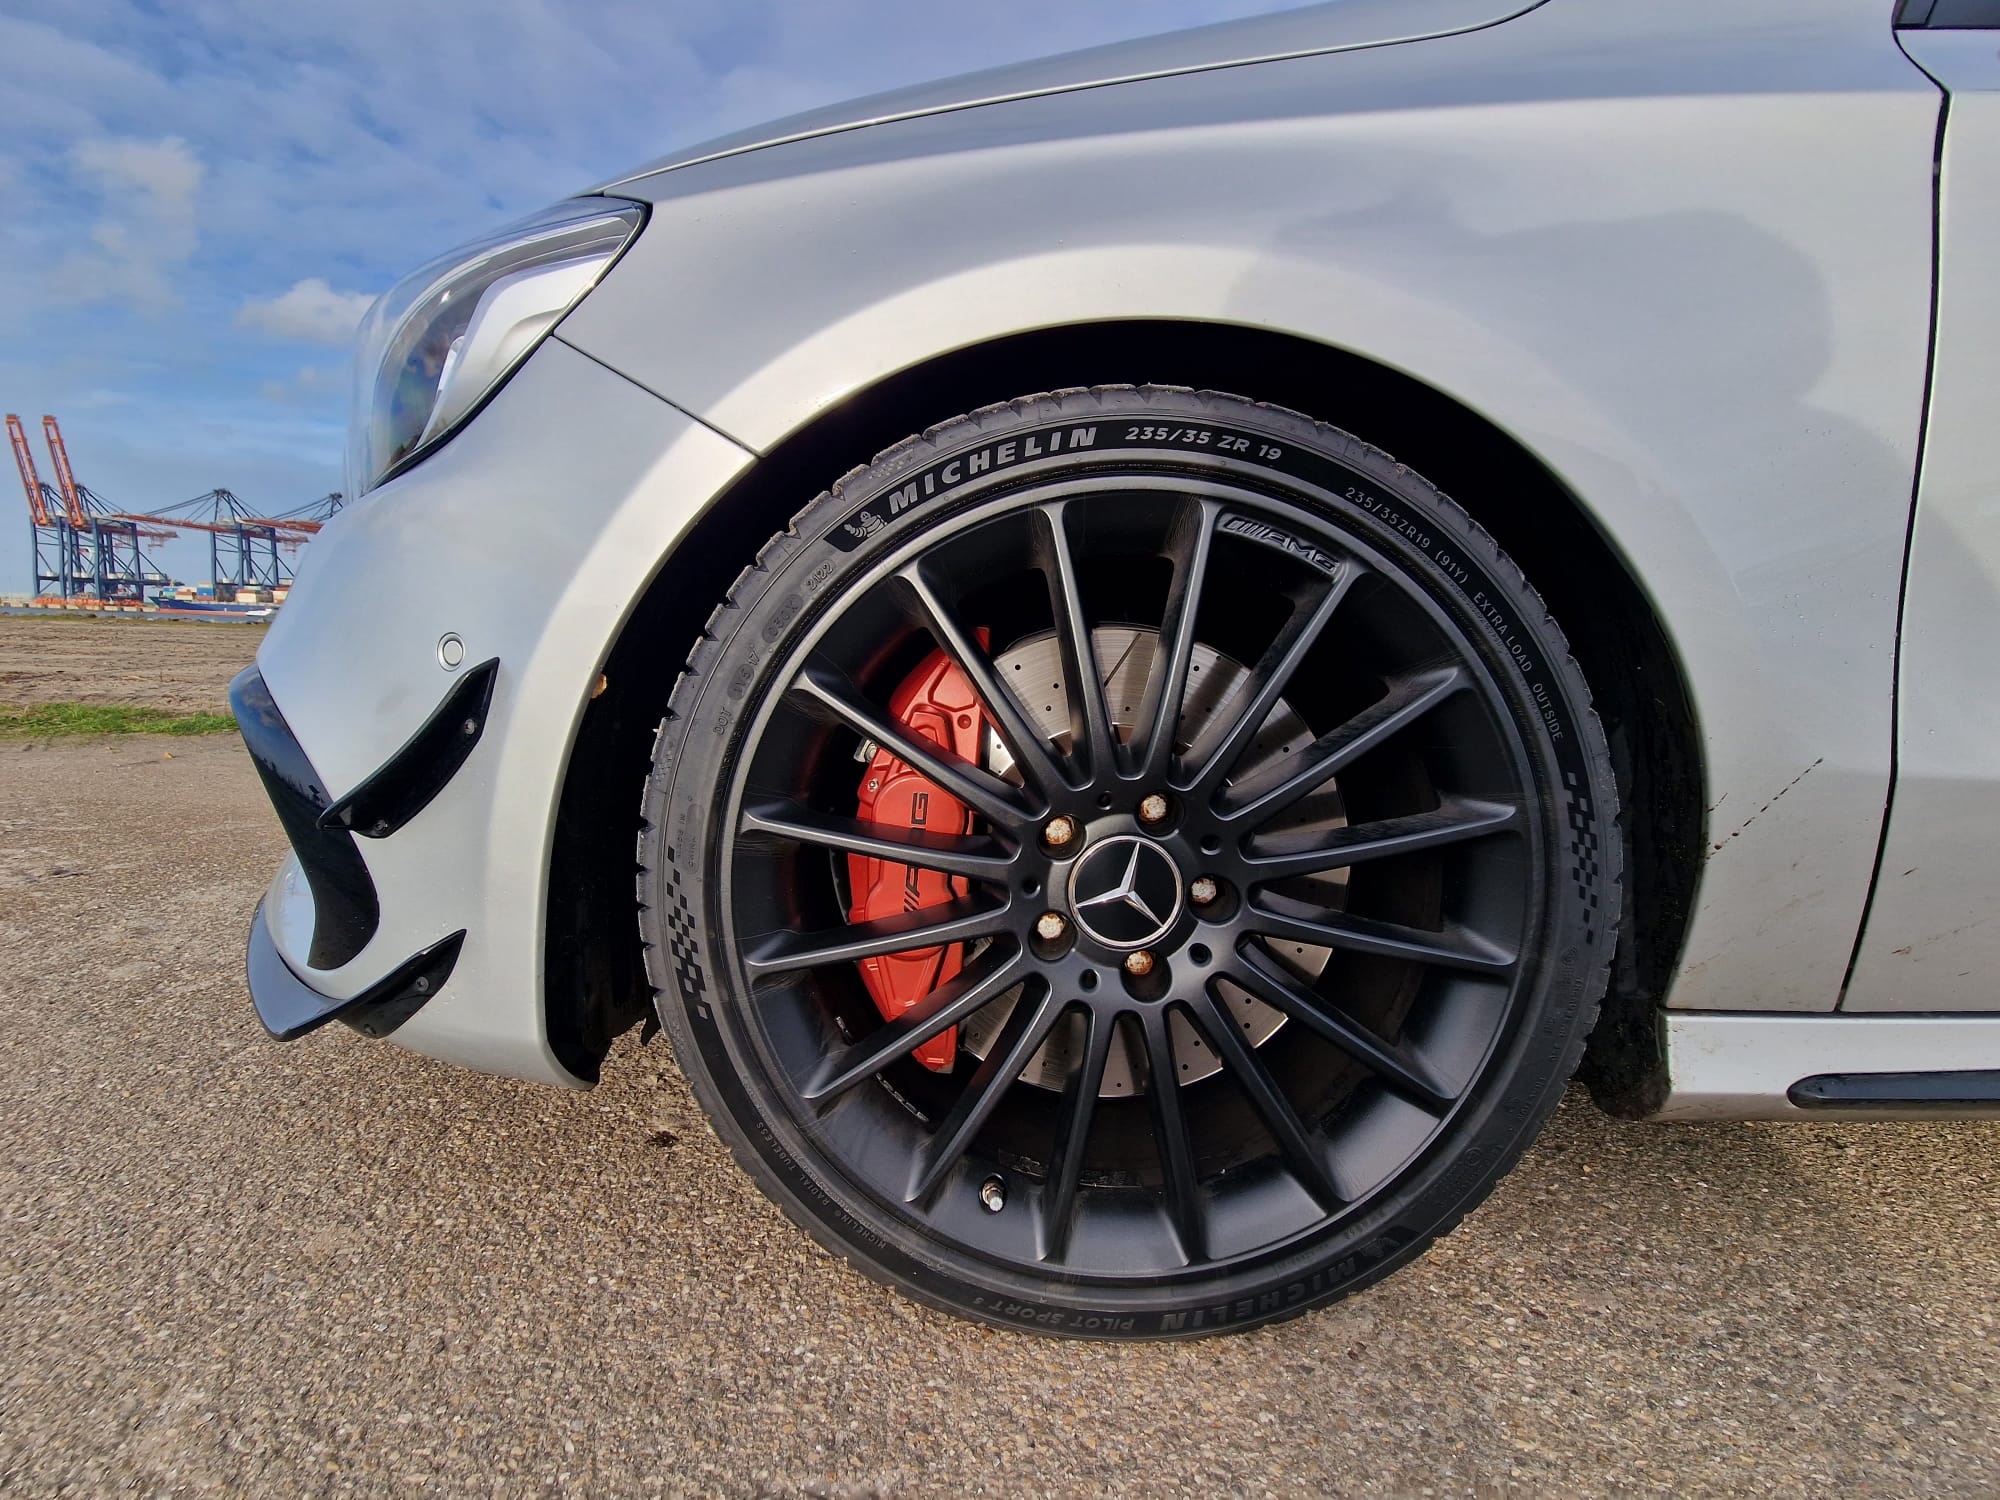 The Michelin Pilot Sport 5 Tire - Get the most from your driving experience